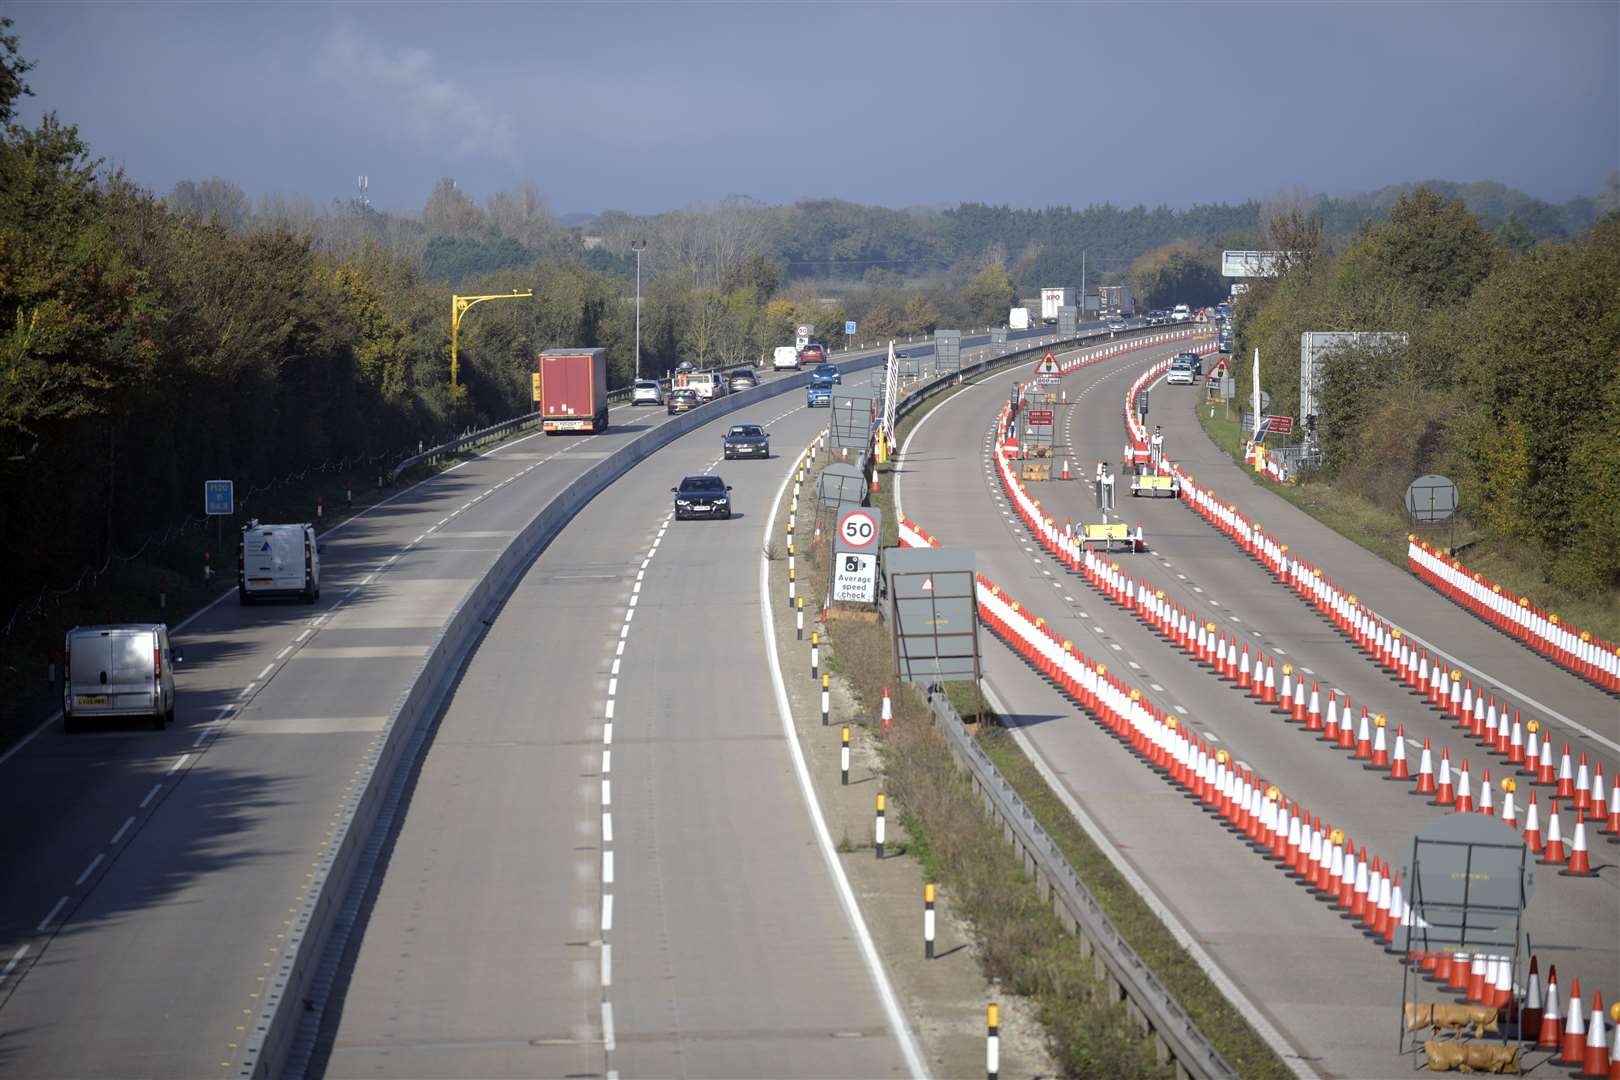 Operation Brock was implemented on the coastbound M20 between junctions 8-9